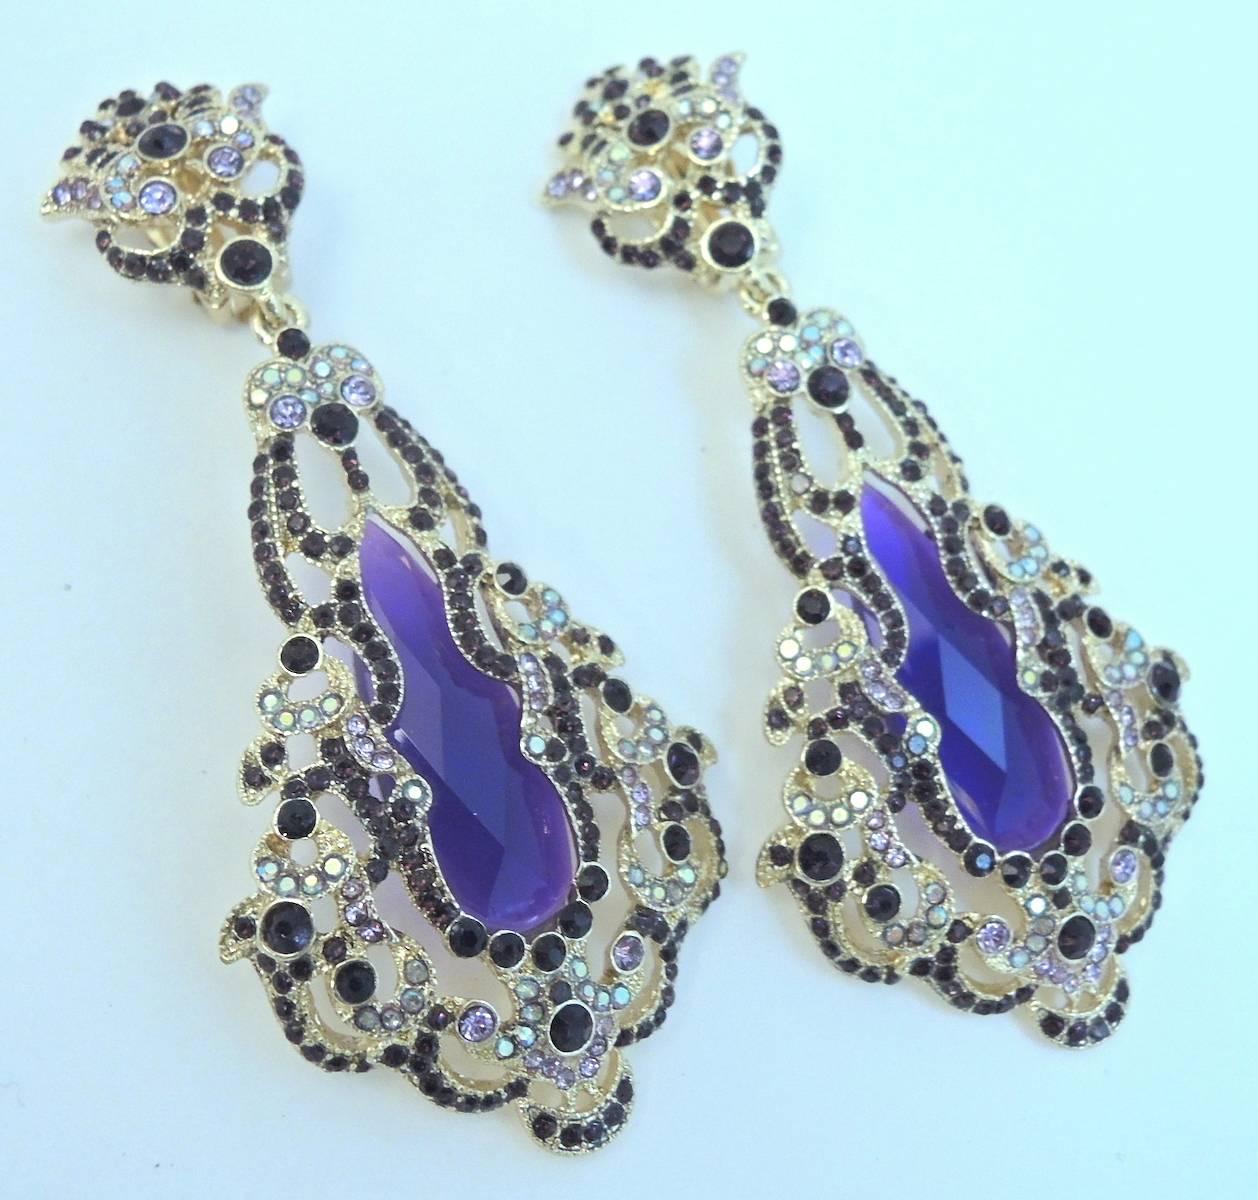 These majestic and impossible to find designer chandelier clip earrings have a faux amethyst center stone surrounded with purple and clear crystals. They are in a gold tone setting, measure 3-1/2” x 1-1/8” and are in excellent condition.